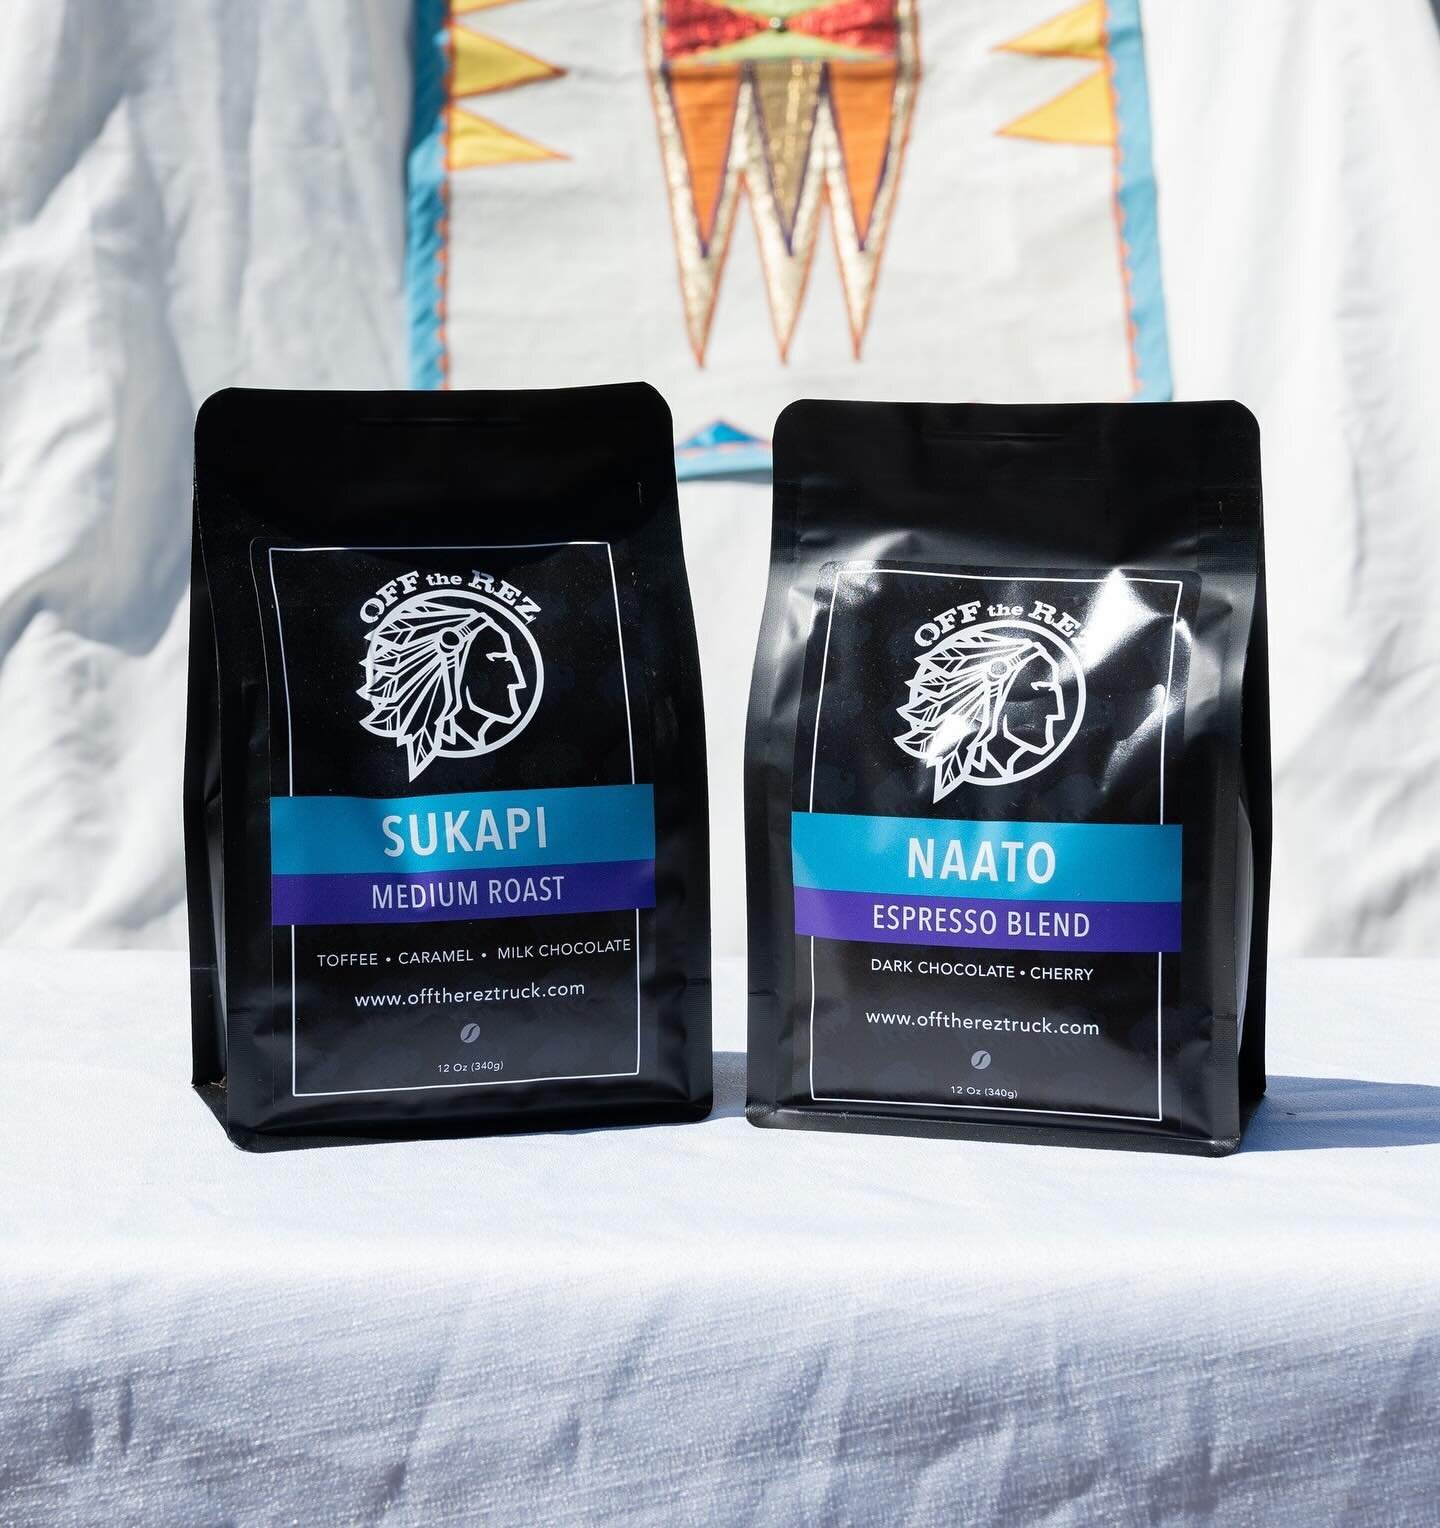 ☕️Now Available☕️

Our In-House Blends and Merch can now ship directly to your home. Checkout our new online store and stay tuned for more updates!

#offtherezcoffee #shoplocal #seattlecoffee #espresso #dripcoffee #localcoffee #offtherez #indigenous 